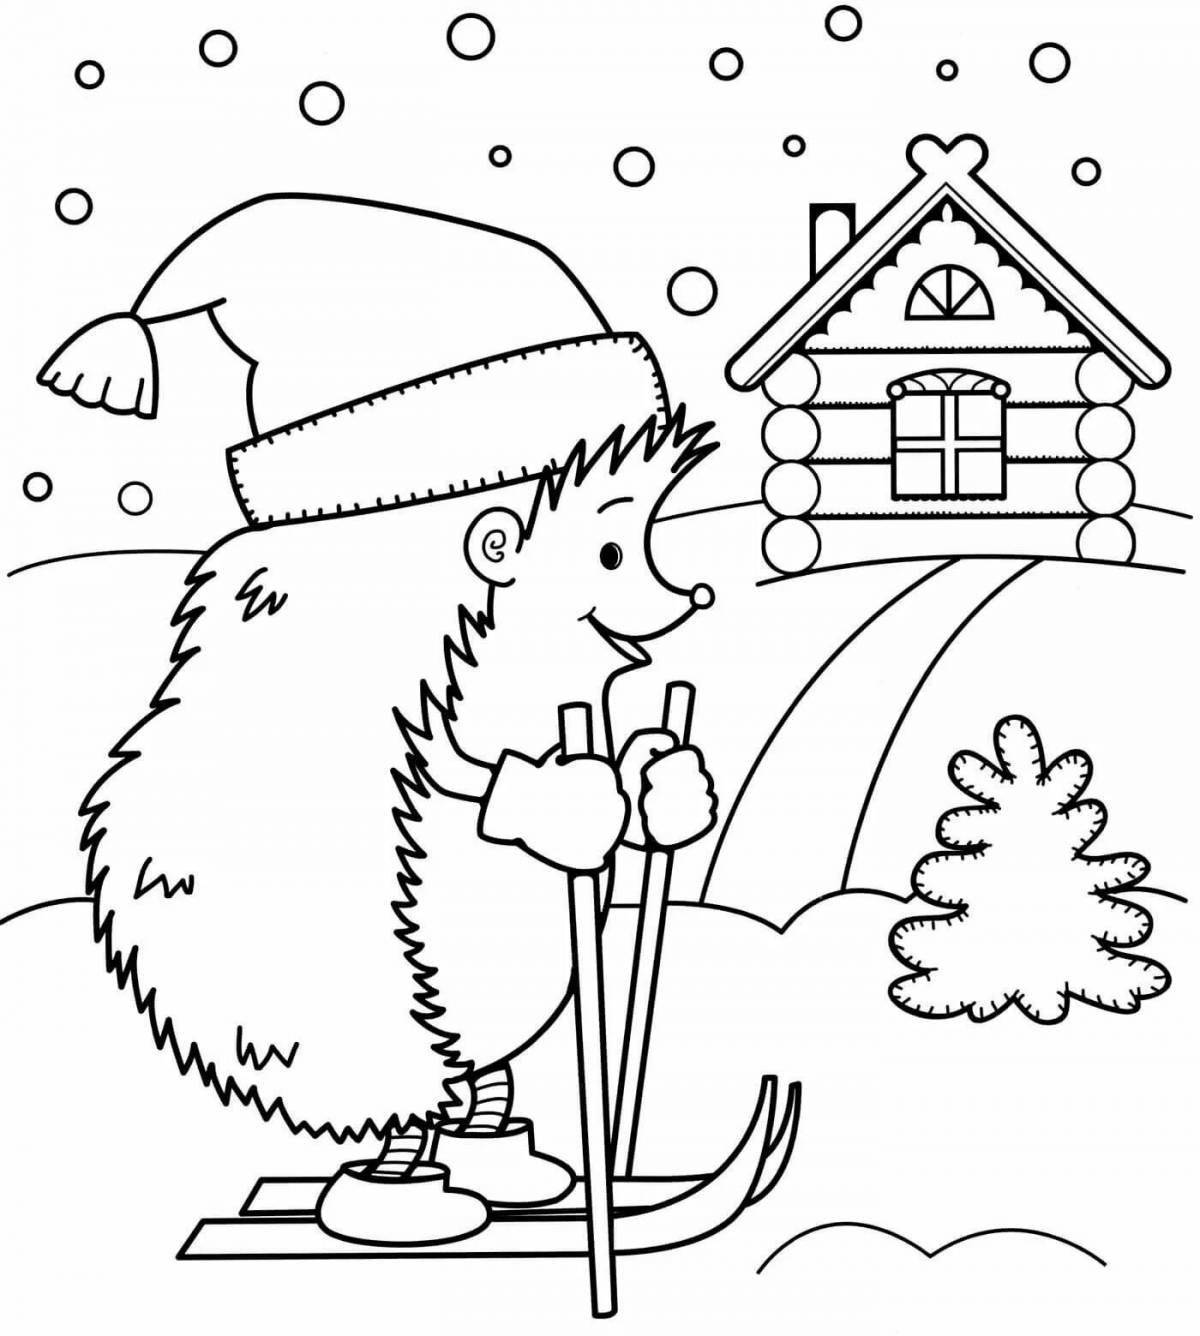 Charming coloring book for children 3-4 years old winter